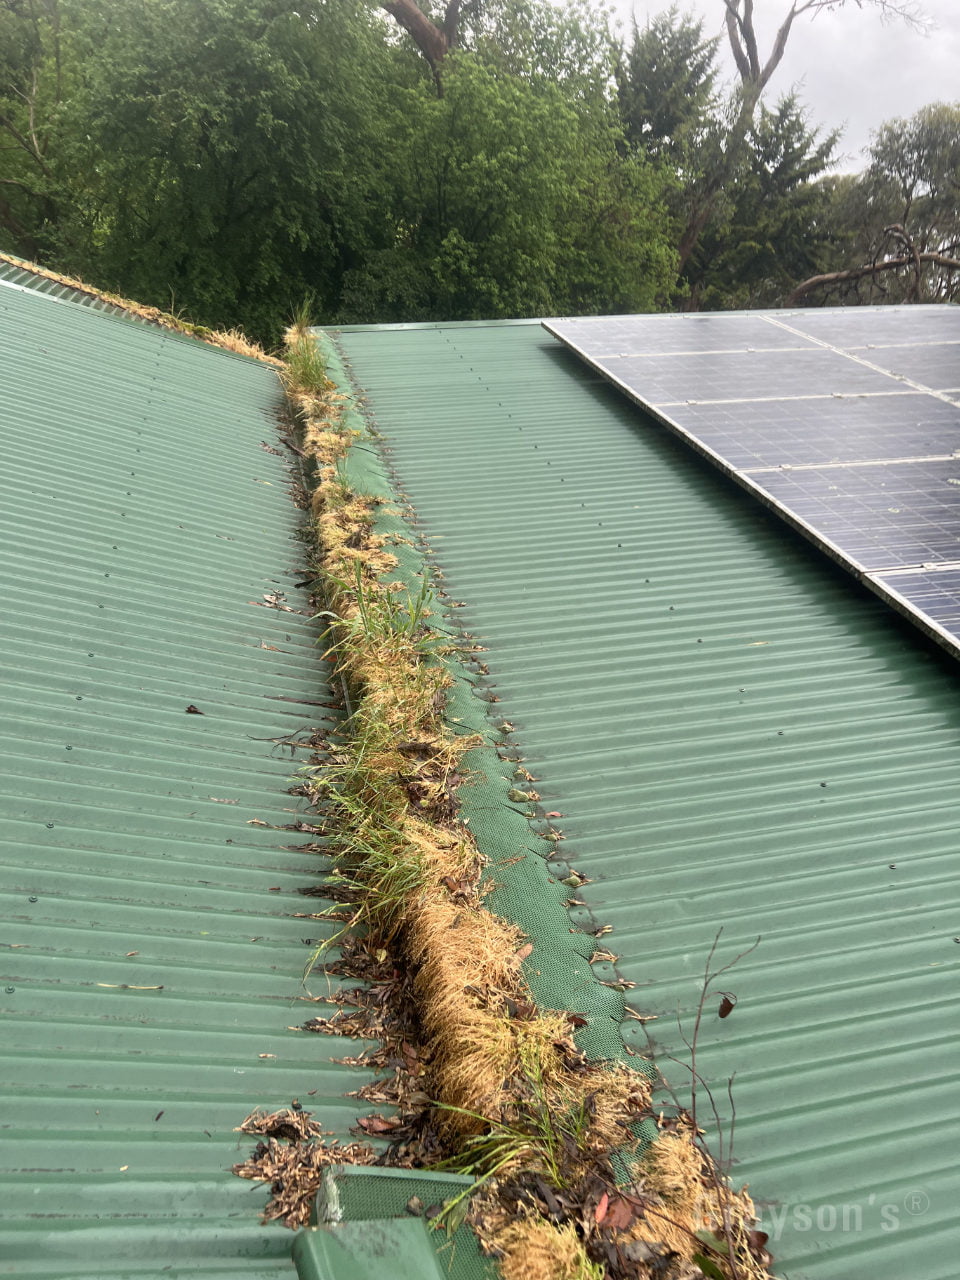 Weeds growing in roof through the gutter guard